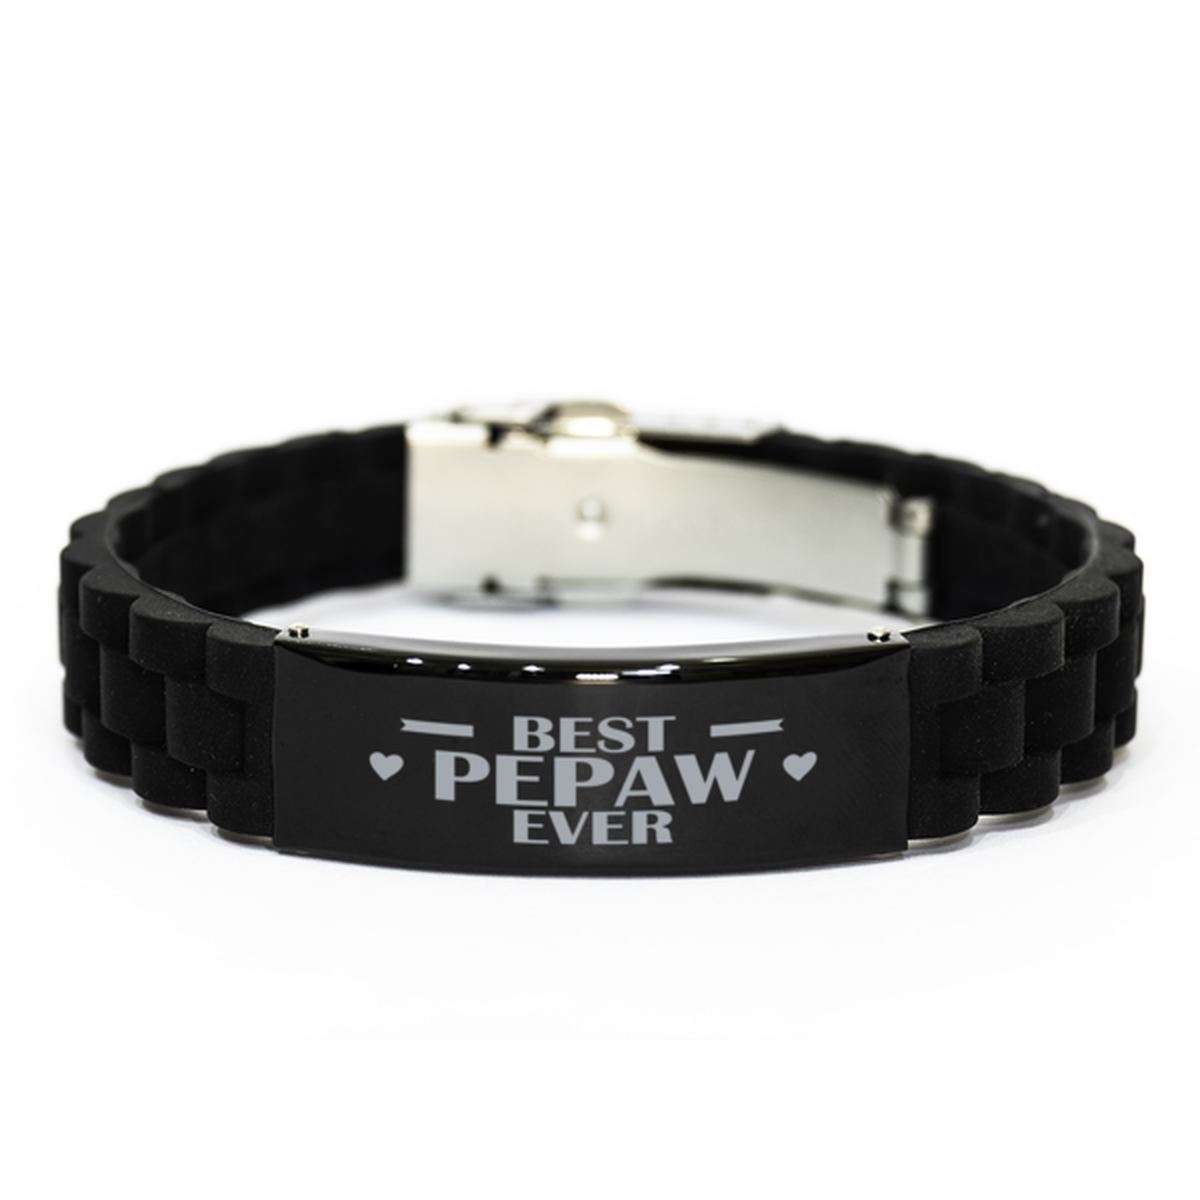 Best Pepaw Ever Pepaw Gifts, Funny Black Engraved Bracelet For Pepaw, Family Gifts For Men